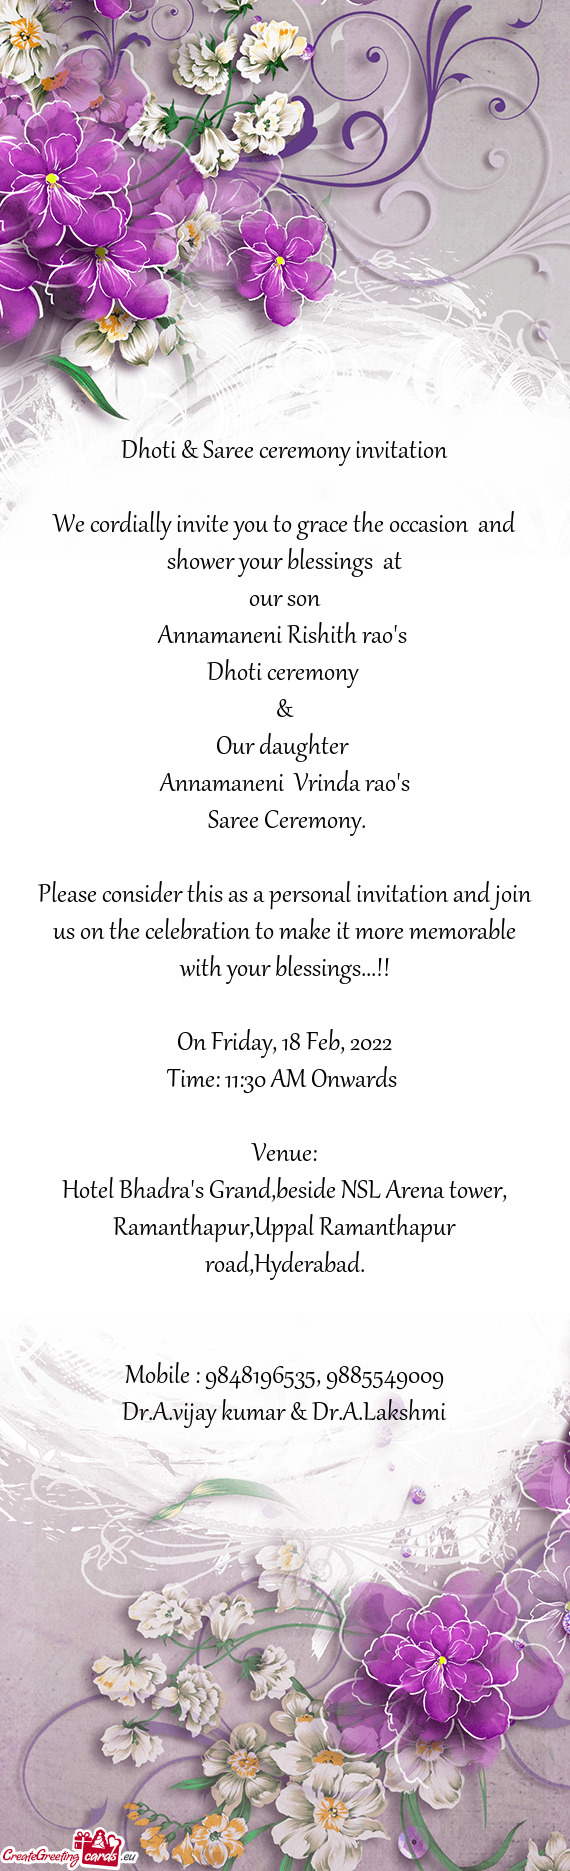 We cordially invite you to grace the occasion and shower your blessings at